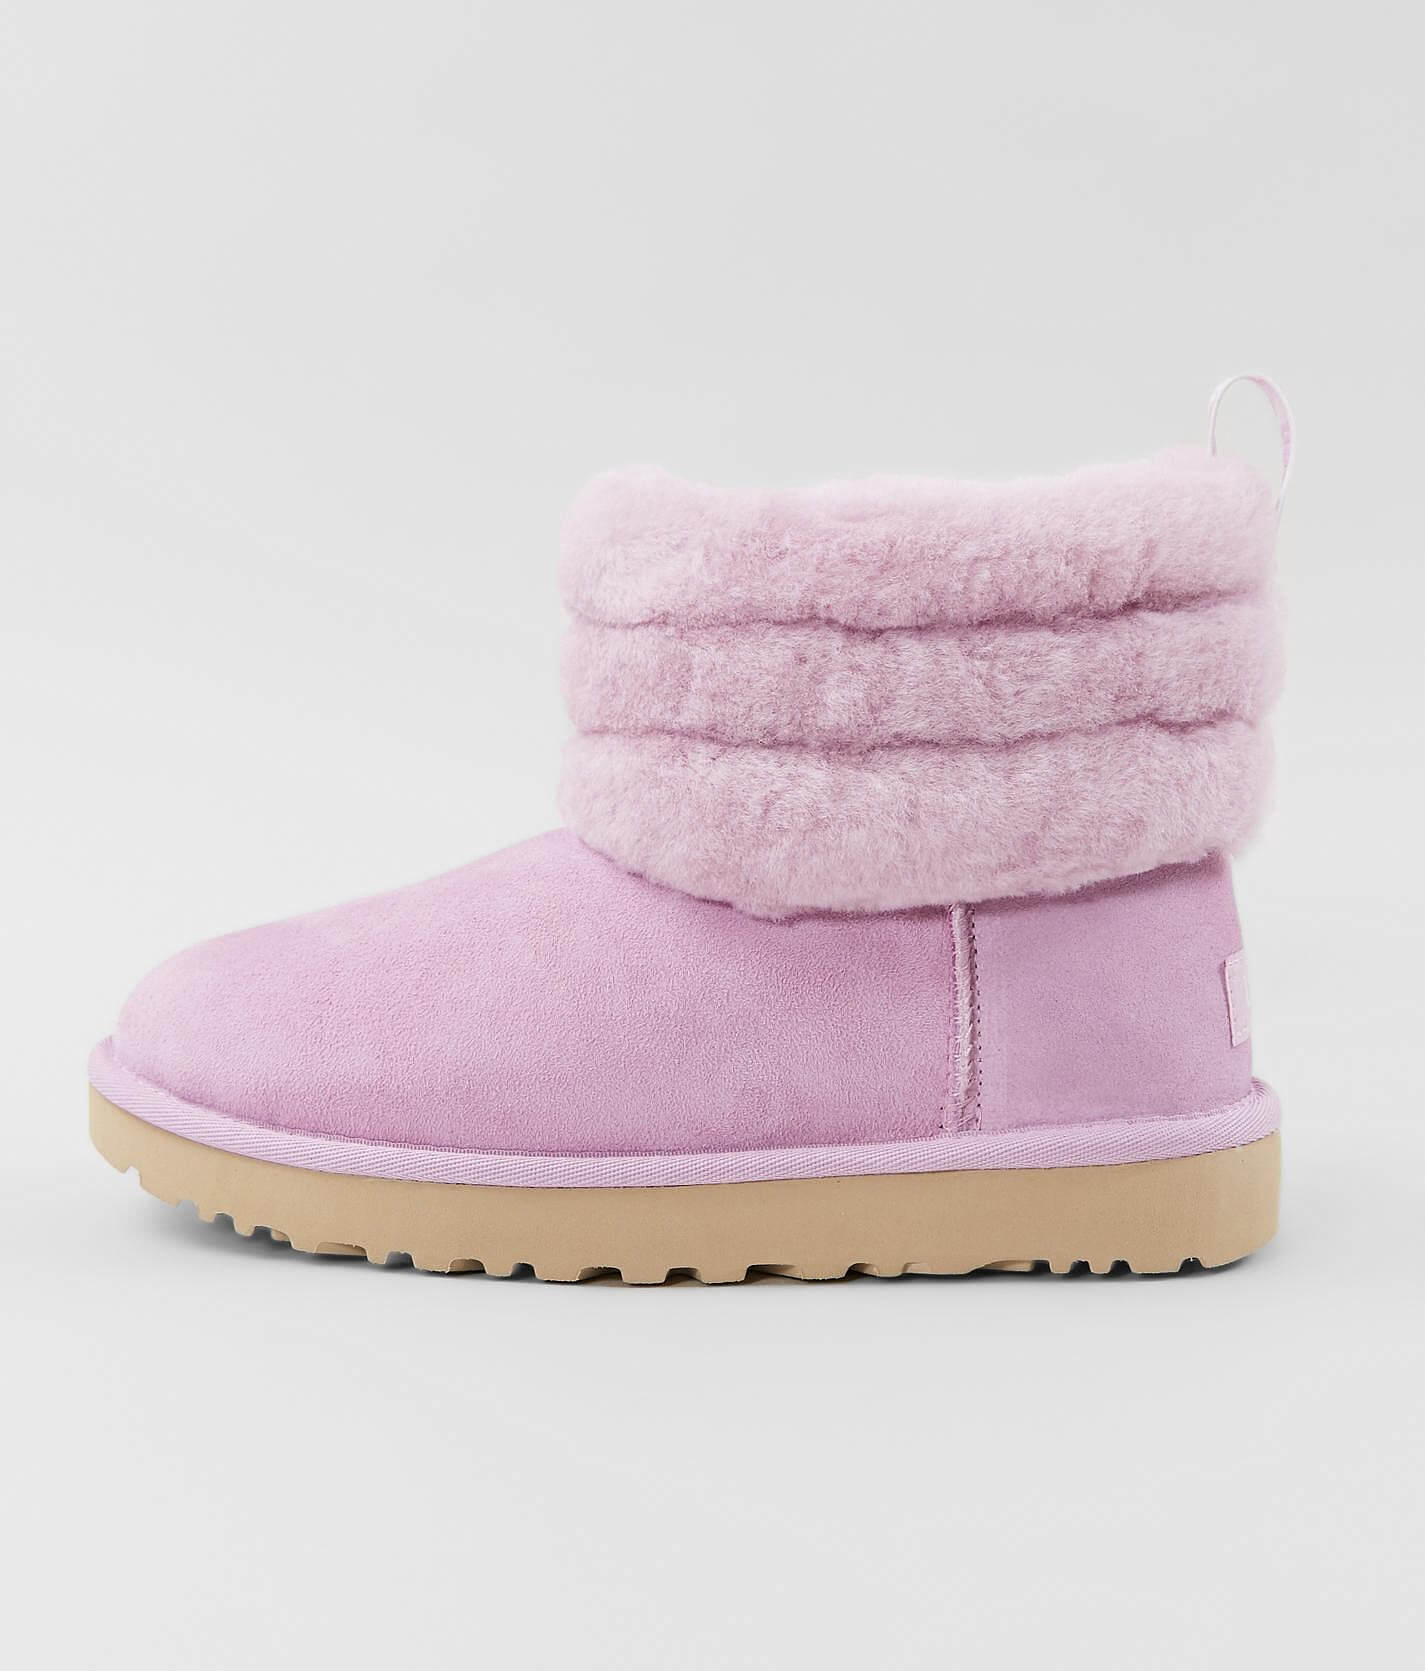 ugg w fluff mini quilted